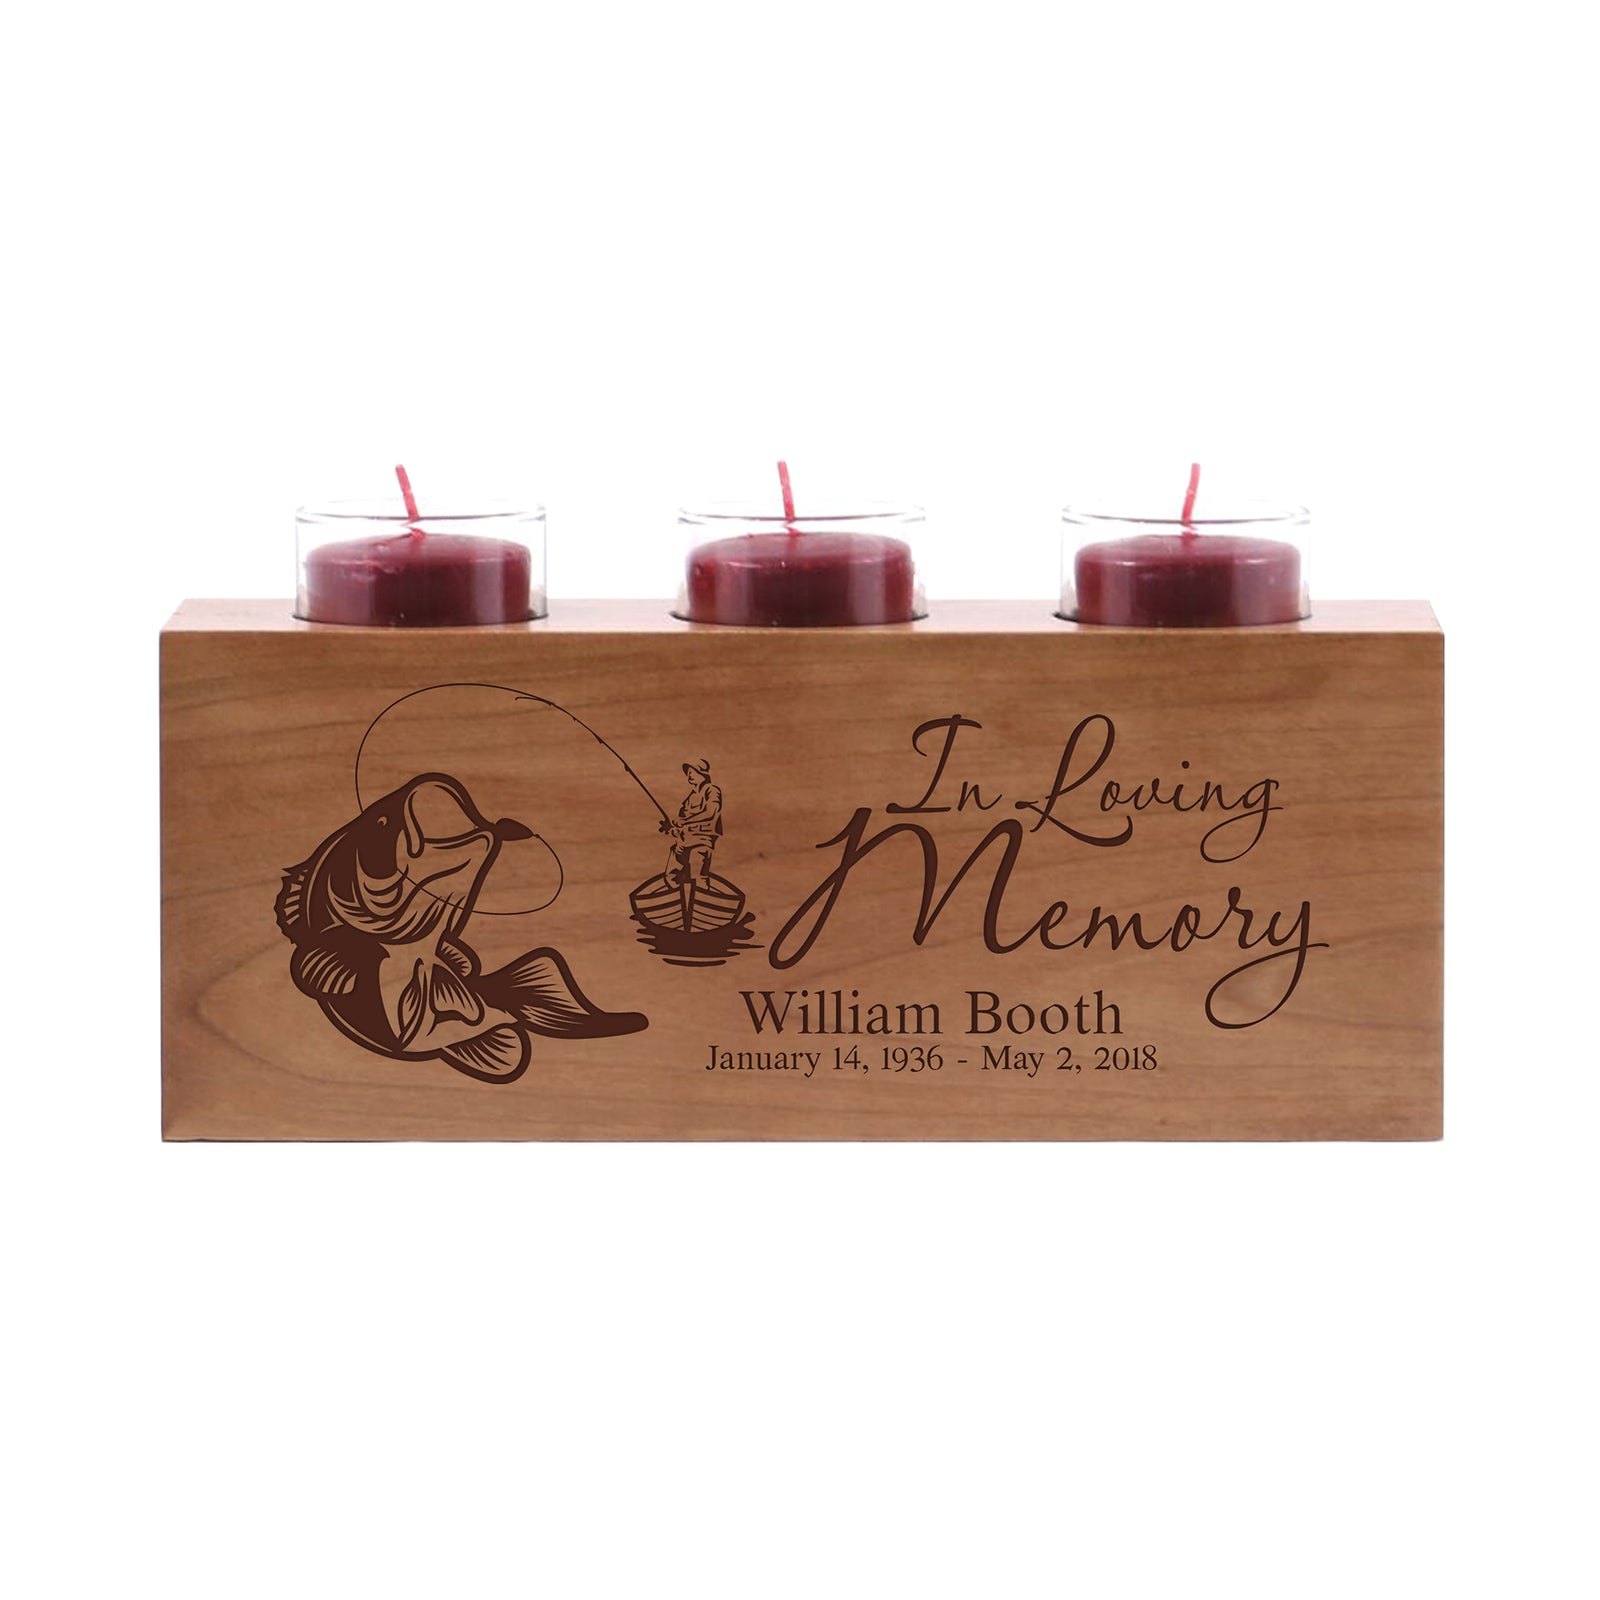 LifeSong Milestones Personalized Memorial 3 Votive Candle Holder In Loving Memory Bereavement Keepsake Candle Holder Loss of Loved One Sympathy Home Decor - 10” x 4” x 4”